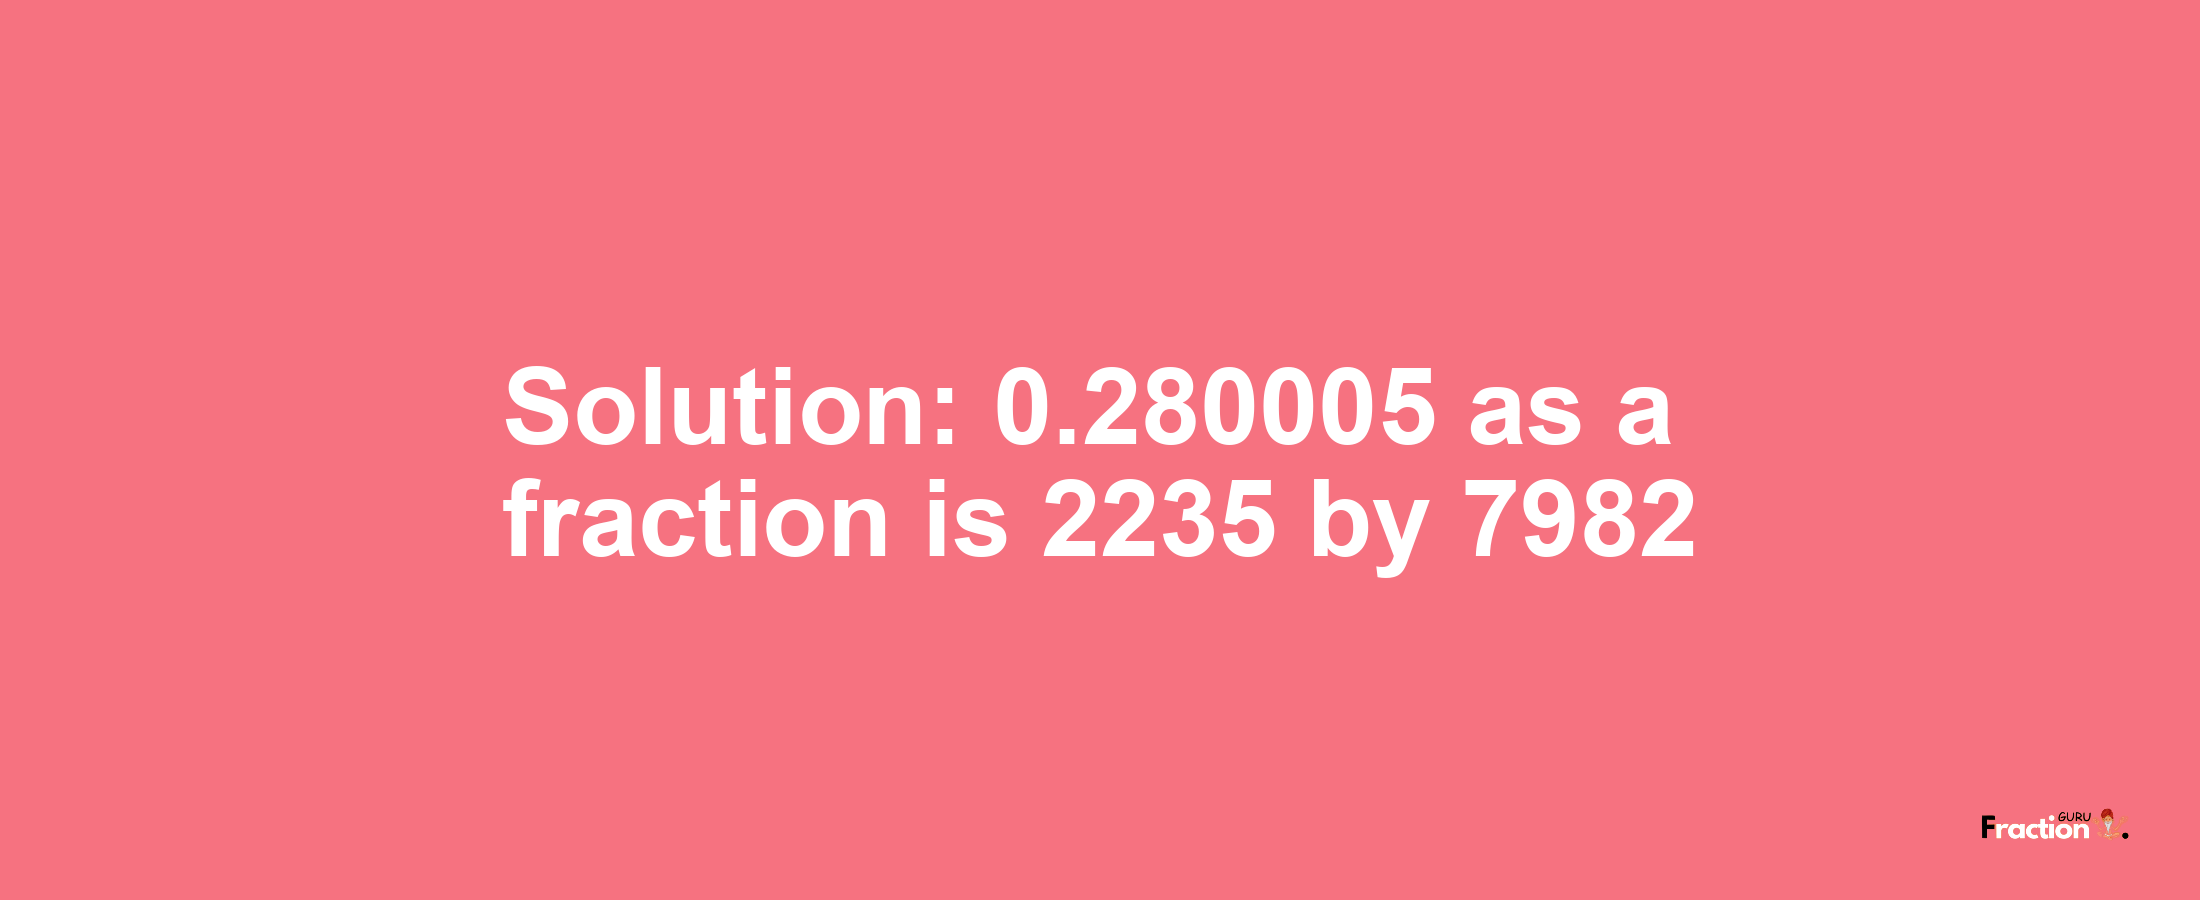 Solution:0.280005 as a fraction is 2235/7982